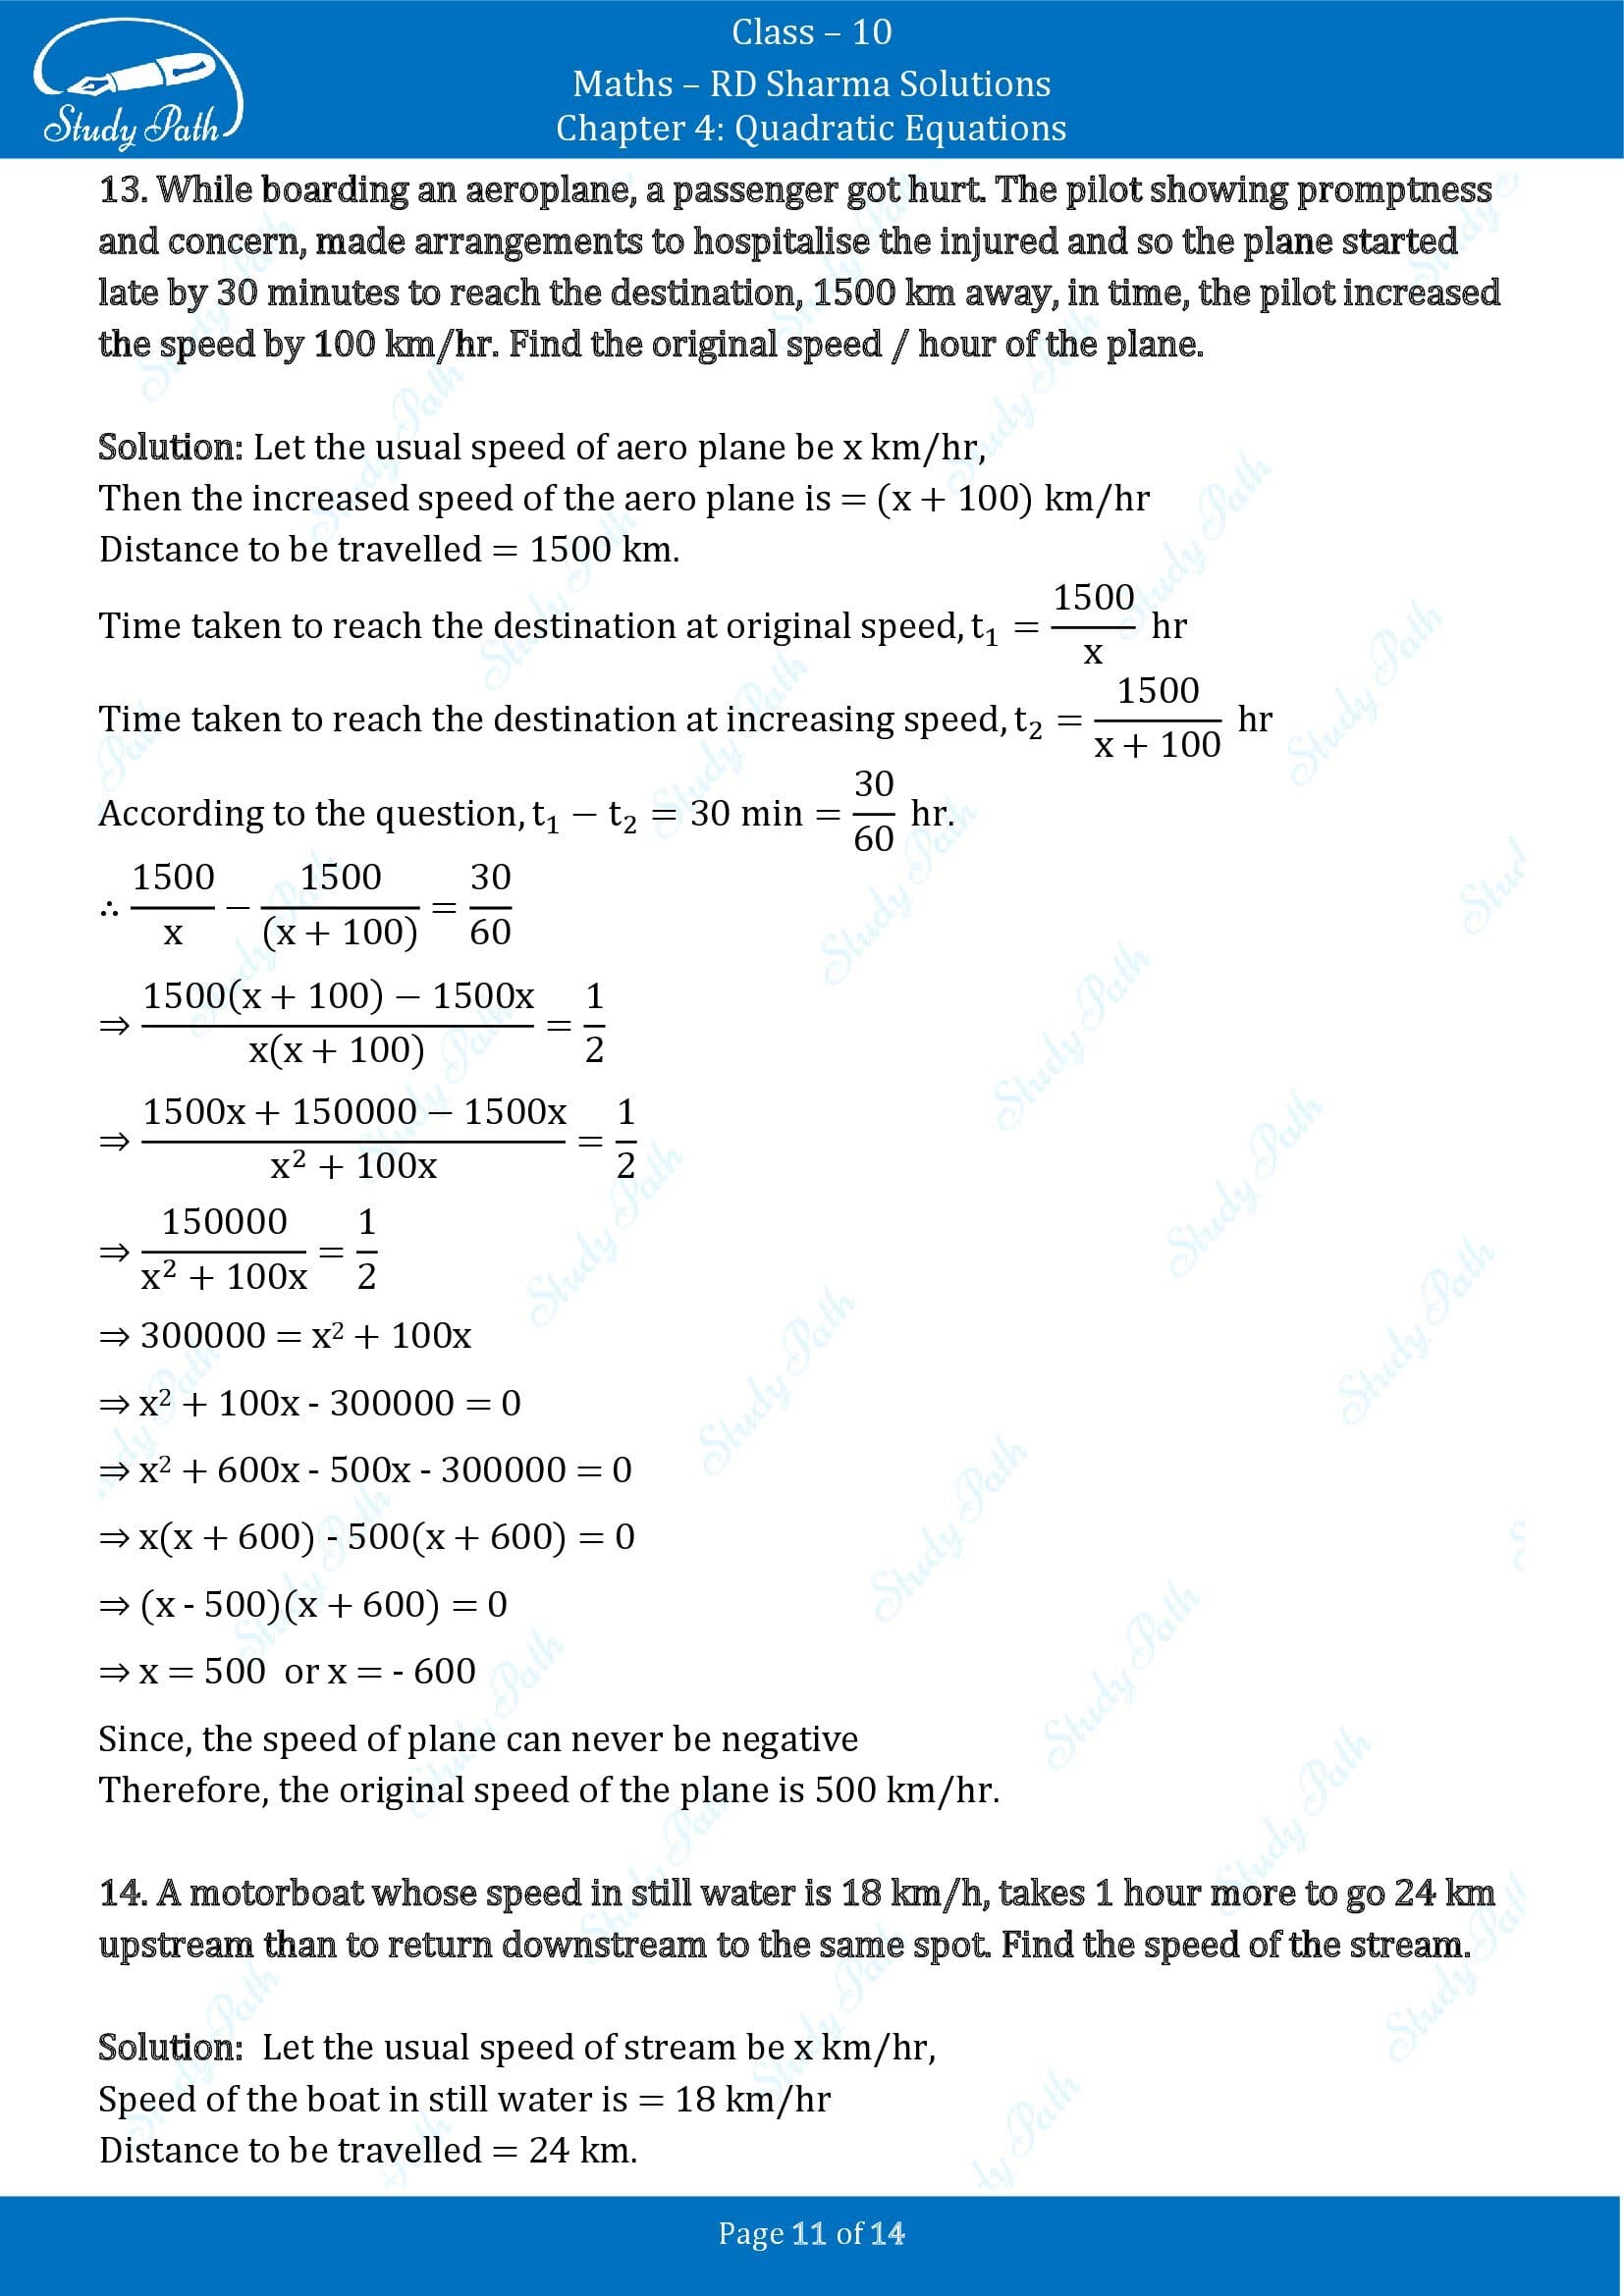 RD Sharma Solutions Class 10 Chapter 4 Quadratic Equations Exercise 4.8 00011